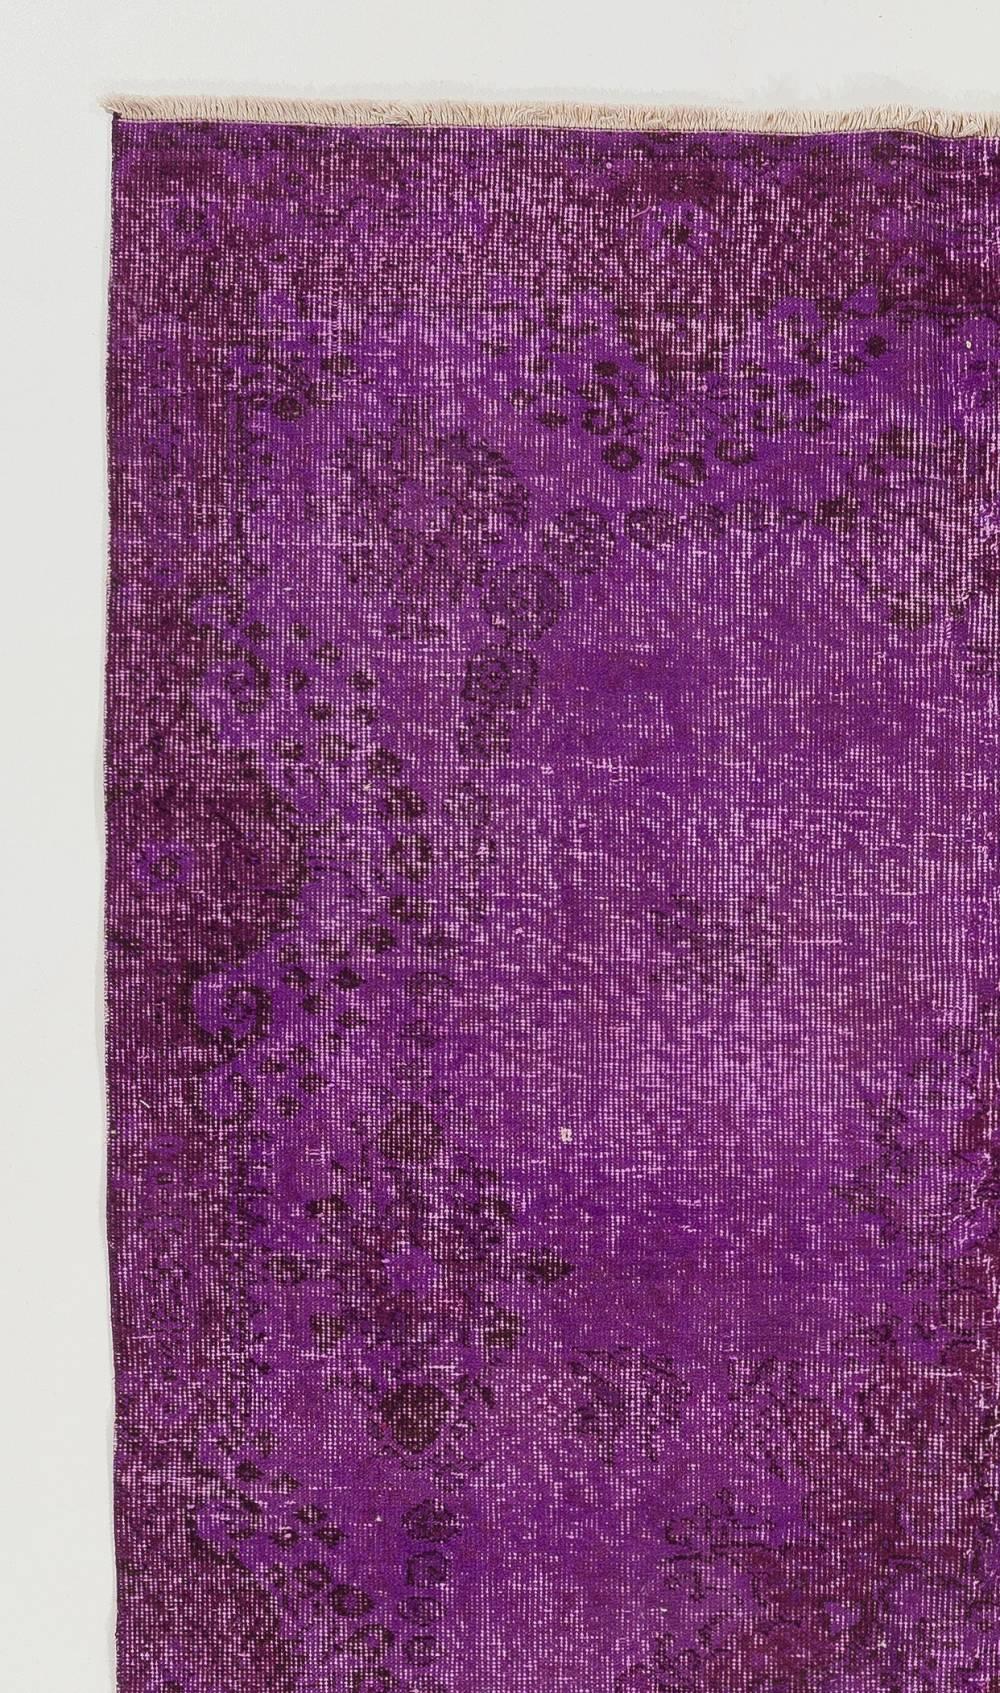 A vintage handmade Turkish rug overdyed in purple color.
Finely hand knotted, low wool pile on cotton foundation. Deep washed. Sturdy and can be used on a high traffic area, suitable for both residential and commercial interiors. 
Measures: 5 x 8.8